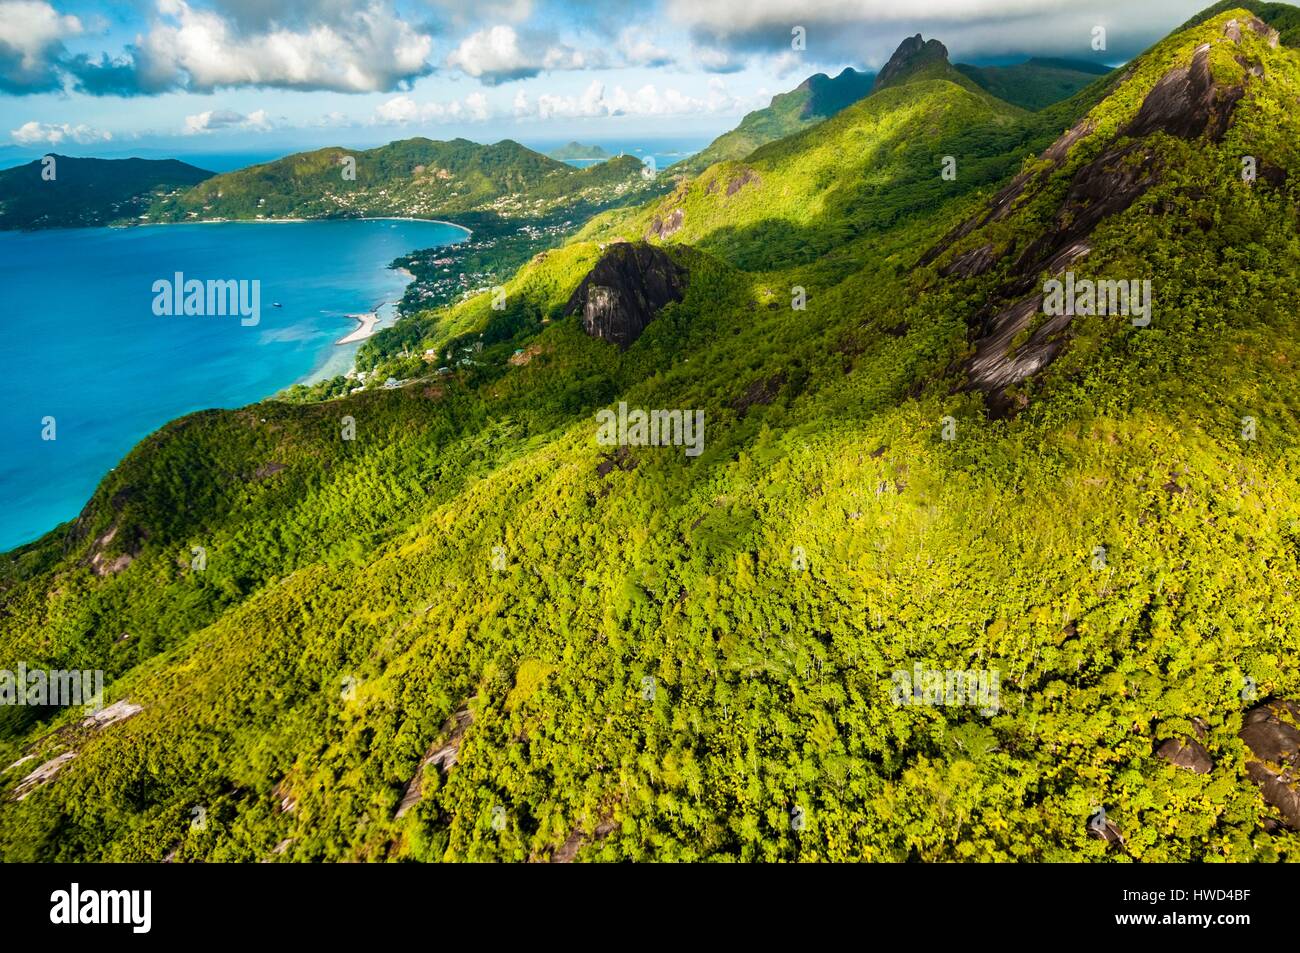 Seychelles, Mahe island, the rainforest and granite cliffs of the Morne Seychellois National Park with the villages of Bel Ombre and Beau Vallon in the background (aerial view) Stock Photo